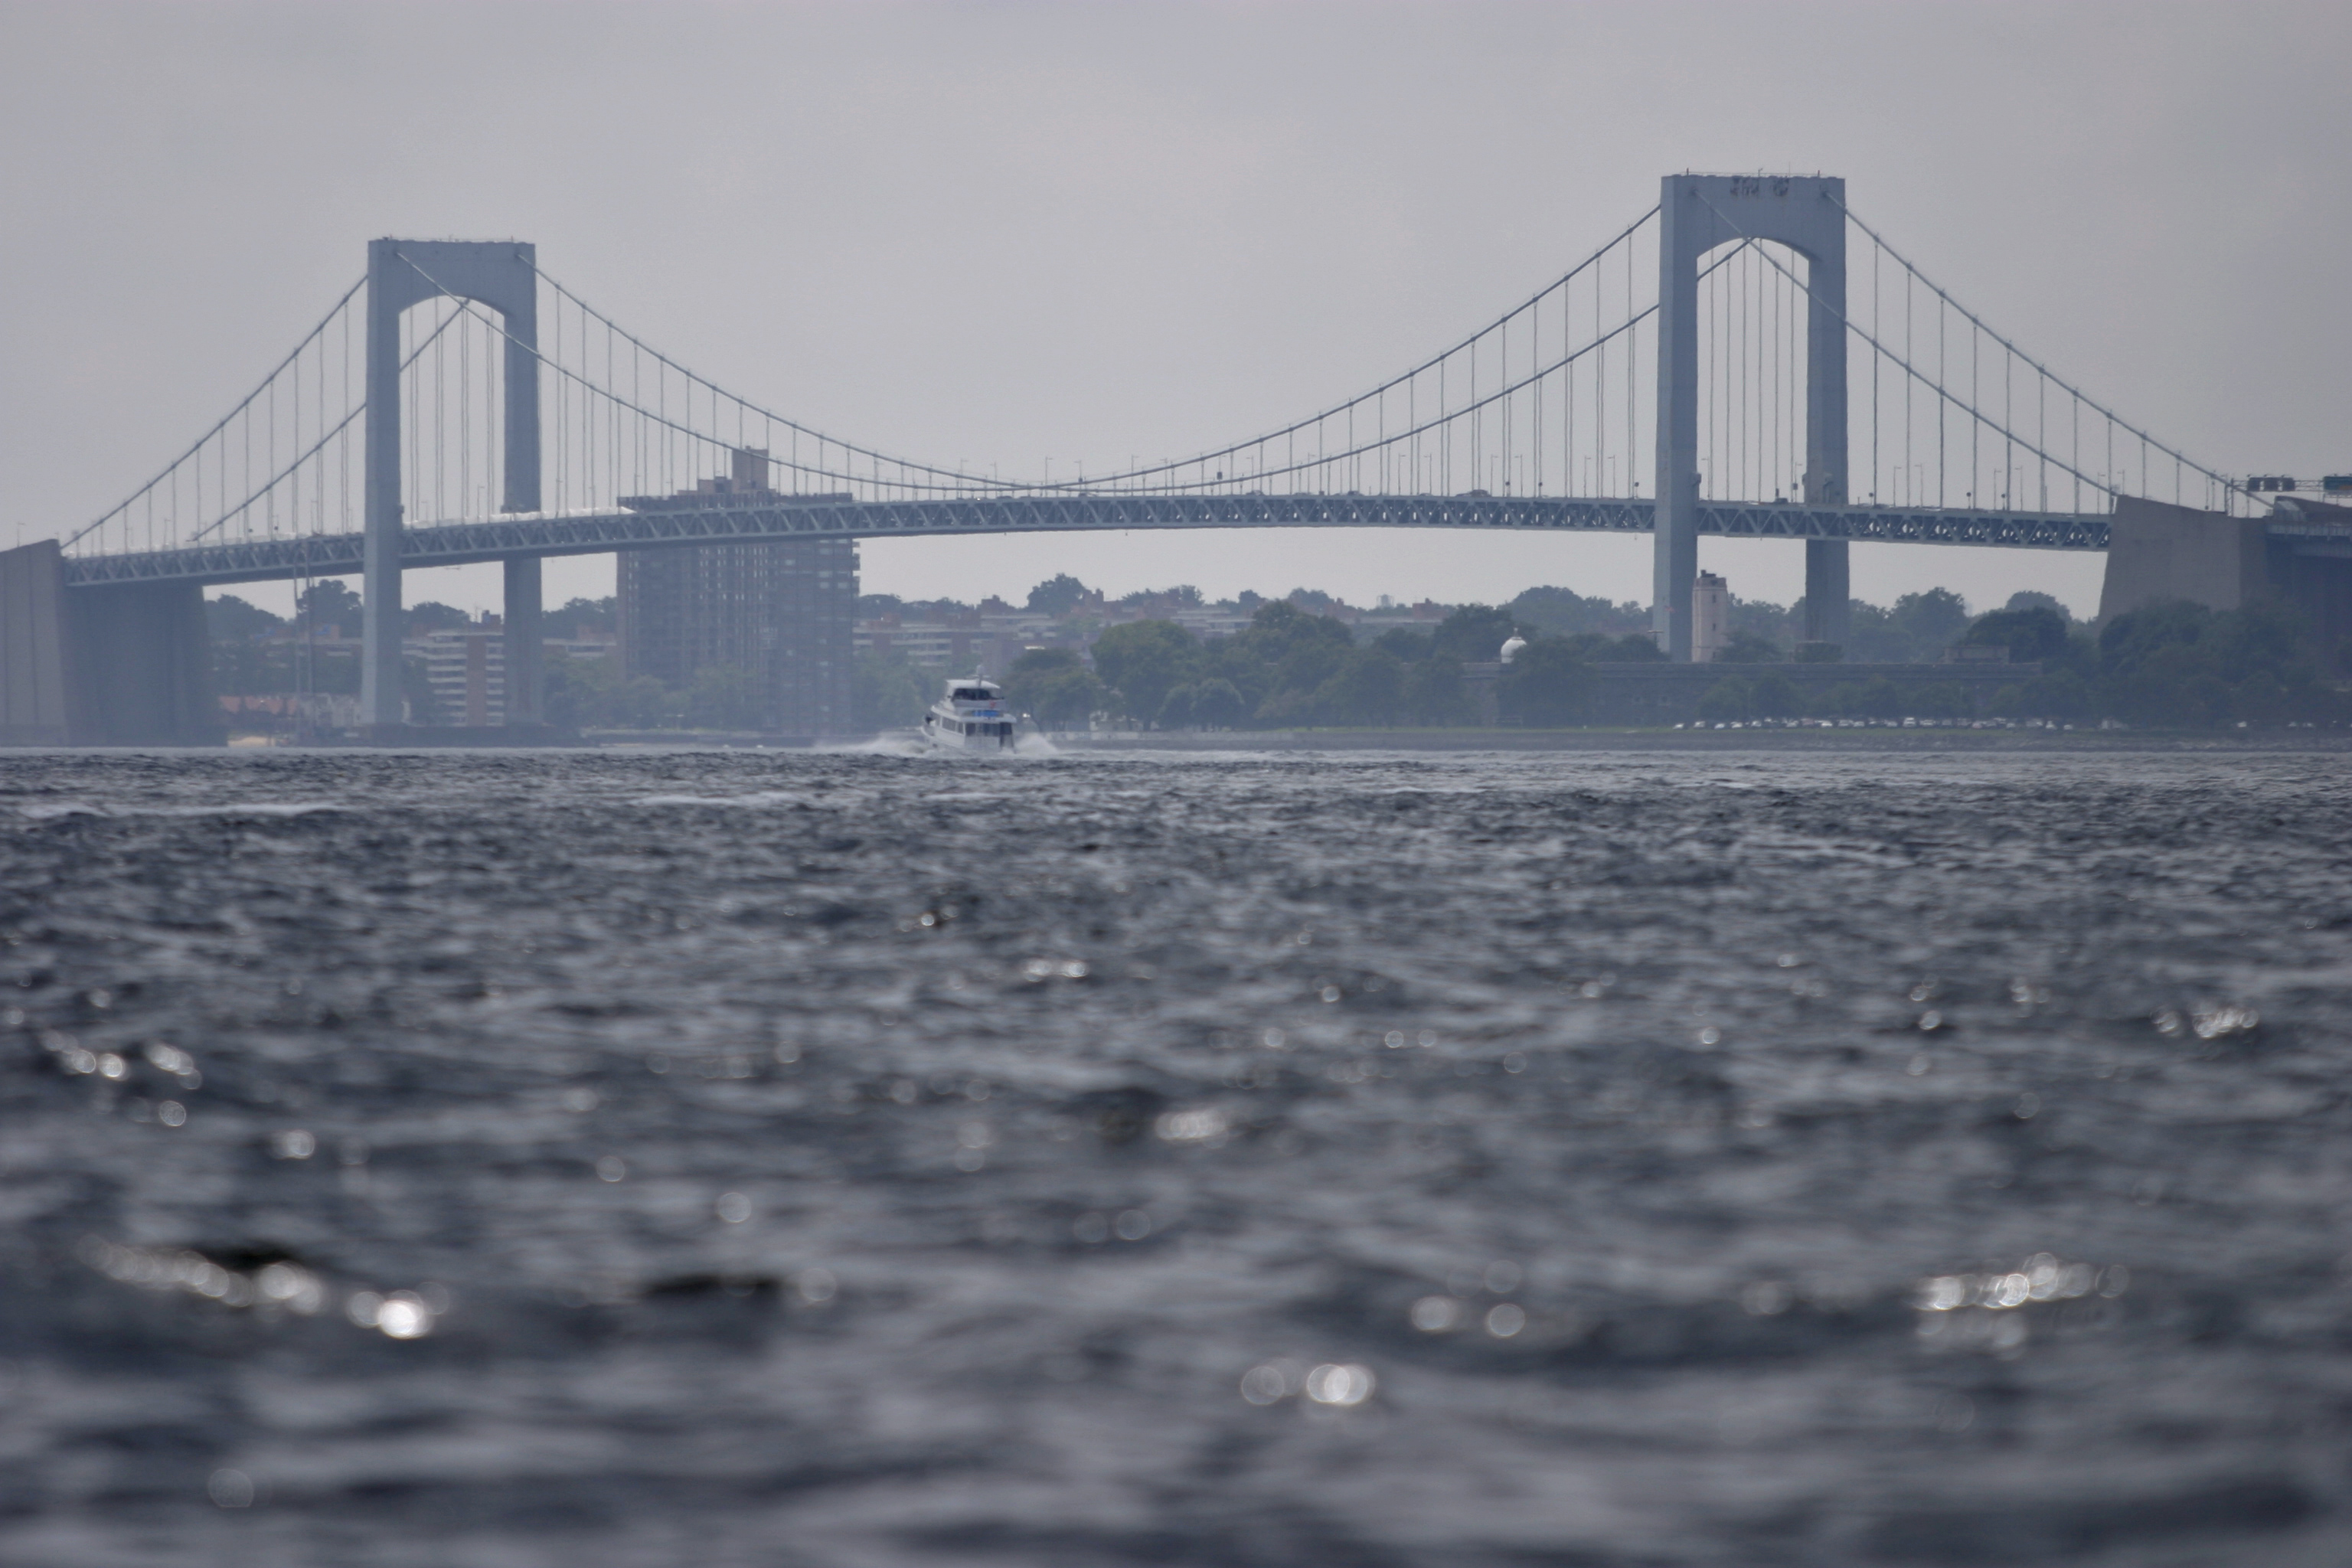 Throgs Neck Bridge connects the Bronx and Queens, running over where the East River meets the Long Island Sound, August 11, 2003